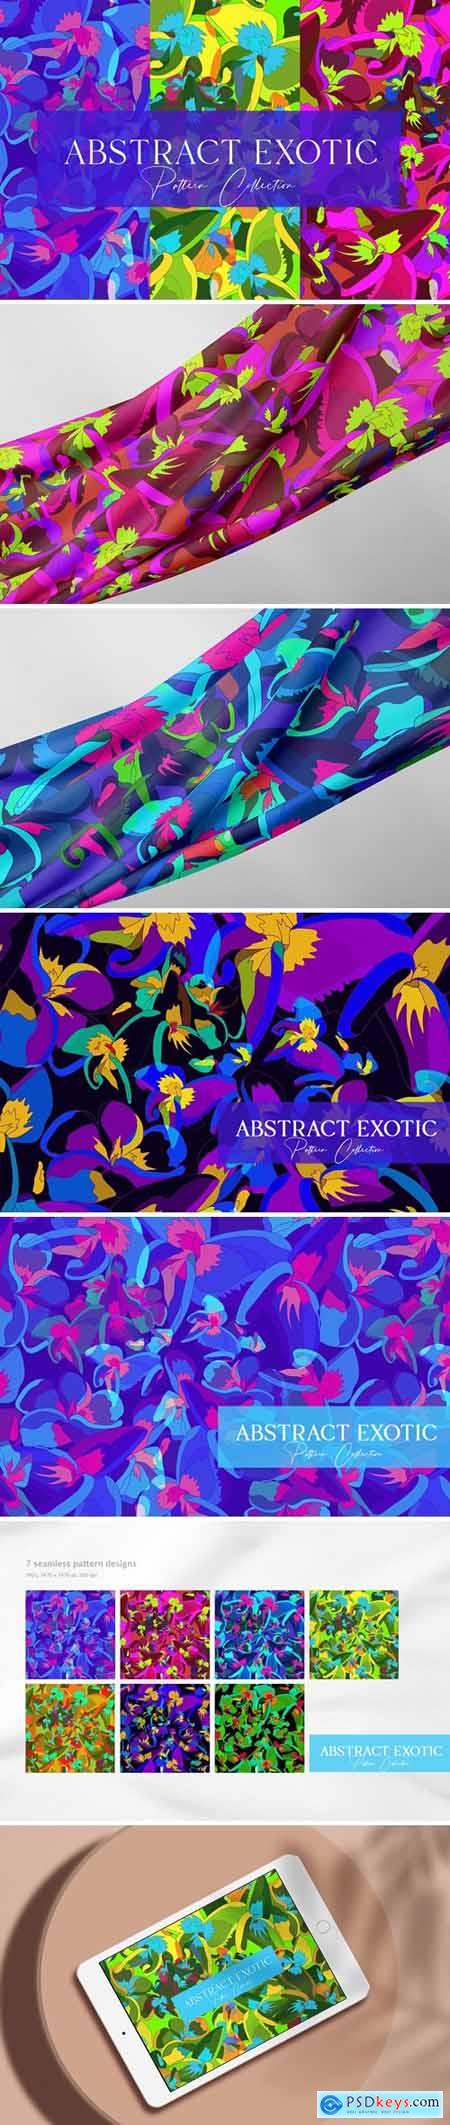 Abstract exotic Texture Background